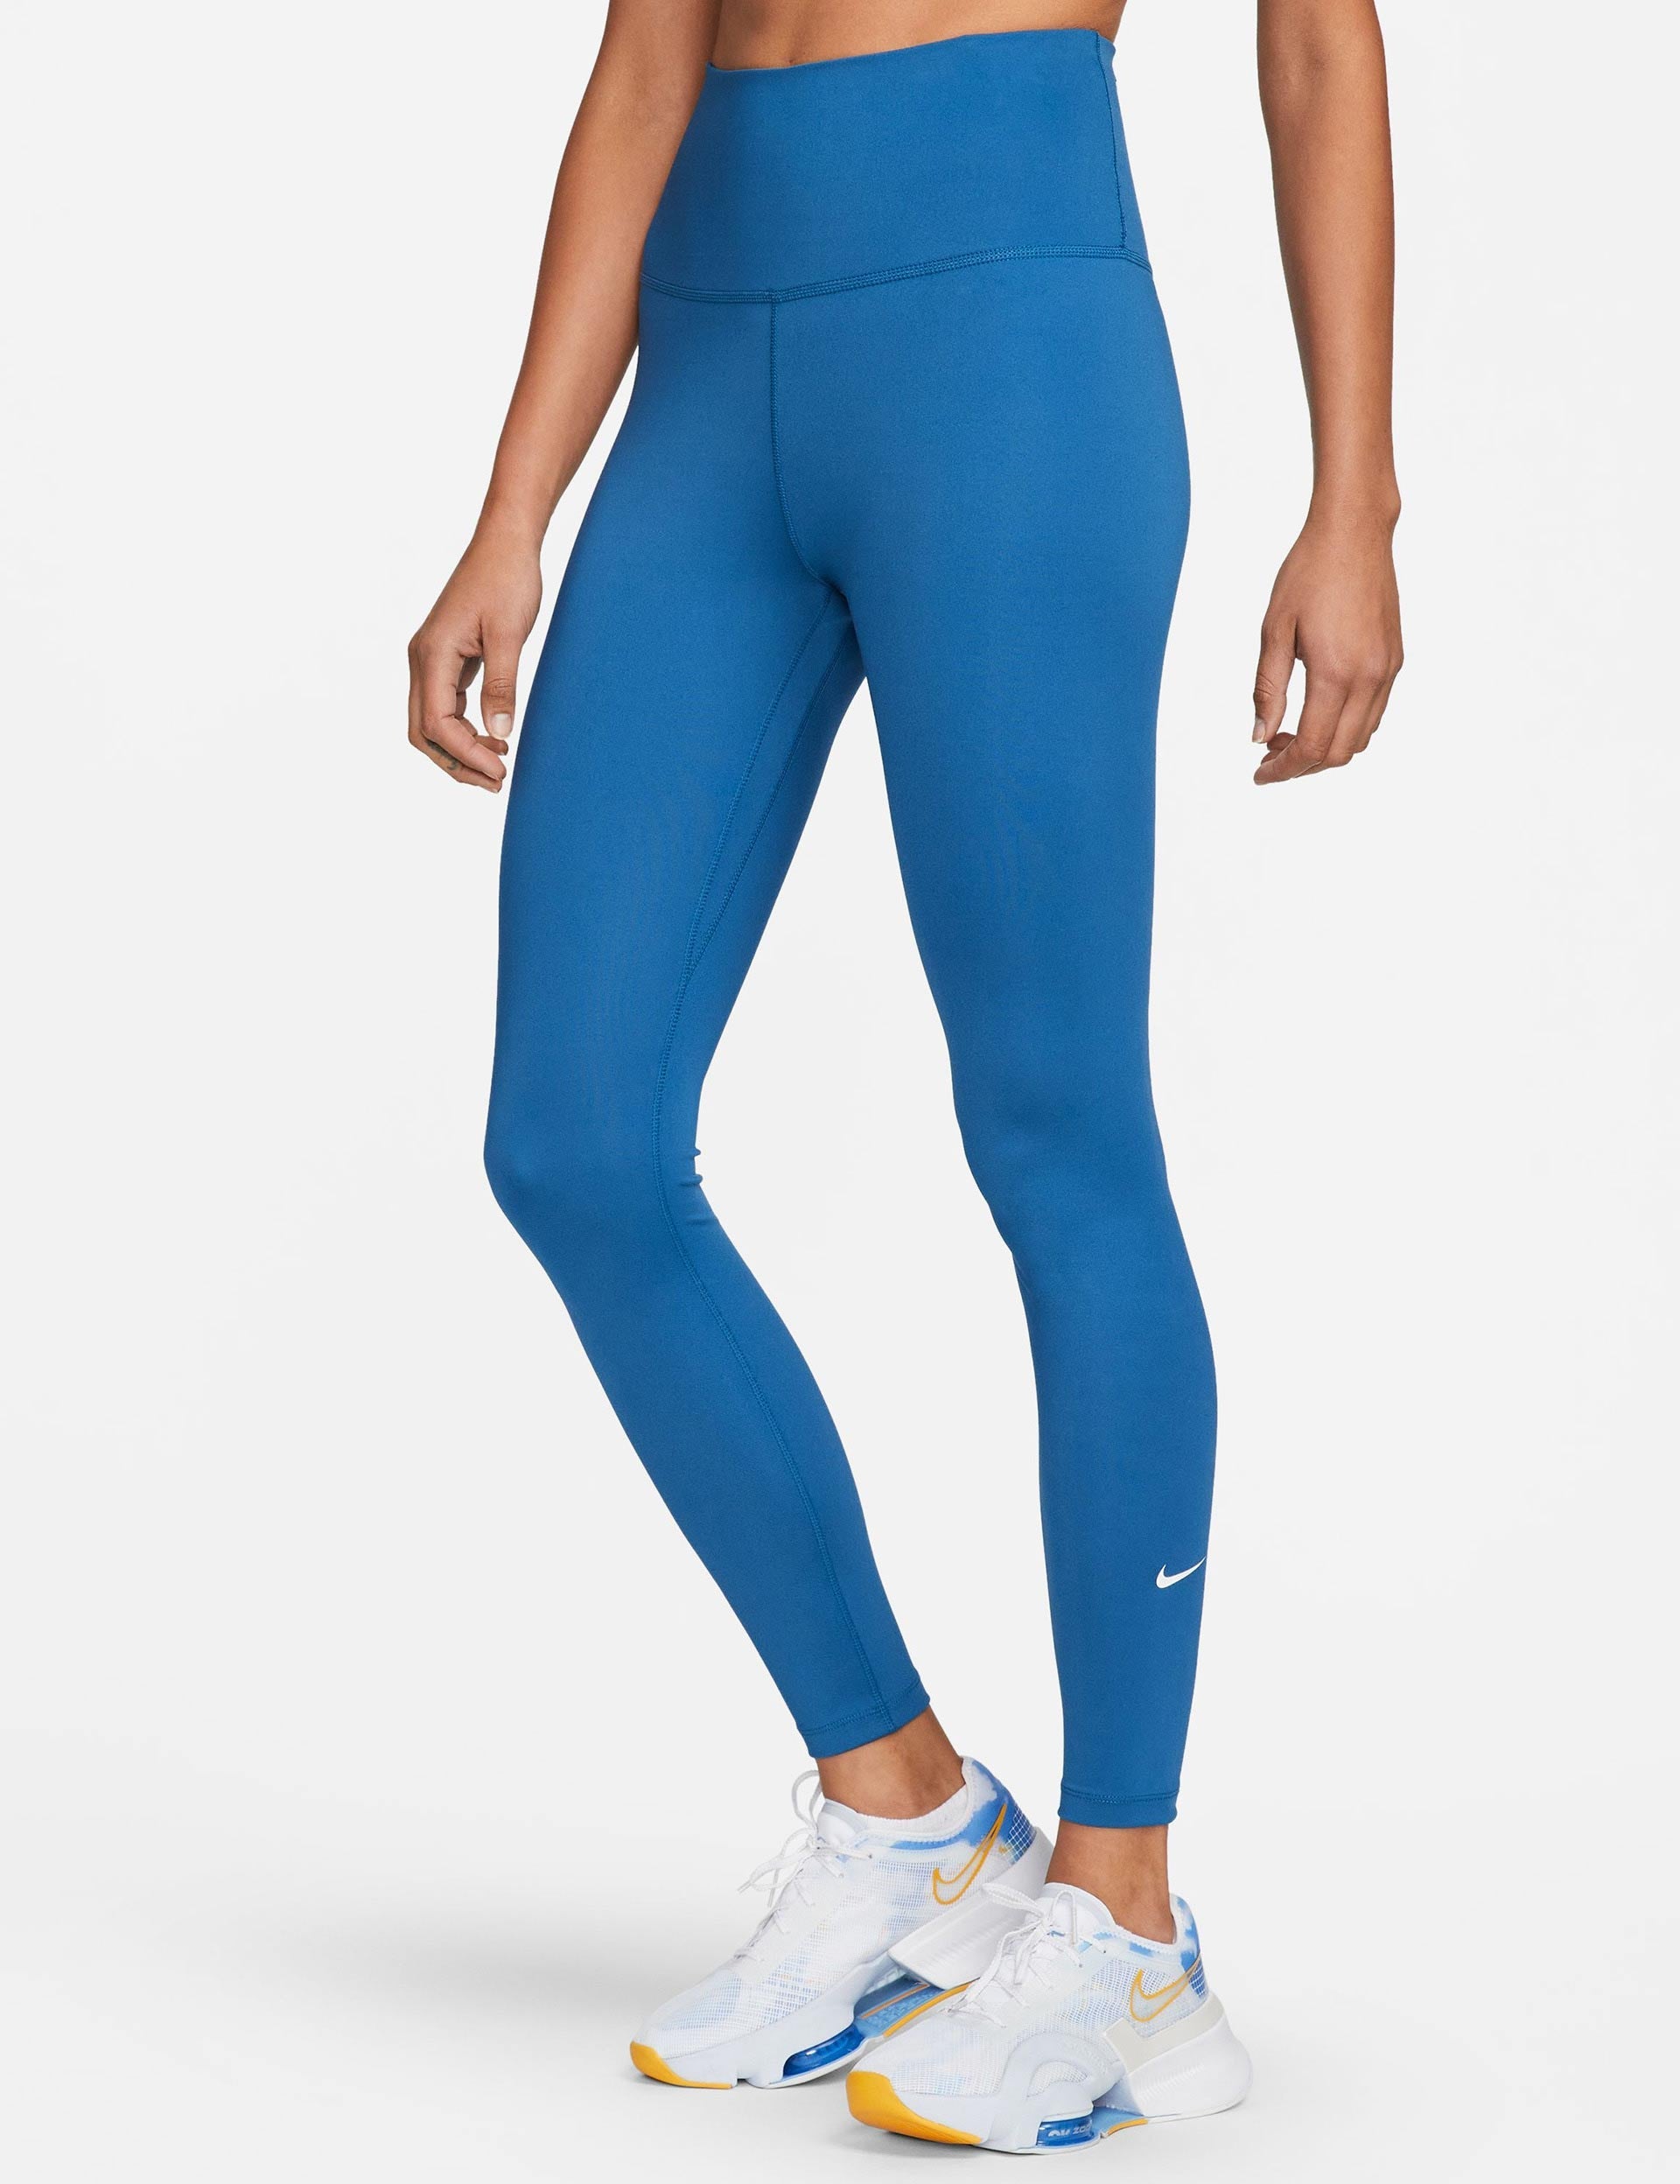 WOMEN'S NIKE ONE TIGHTS